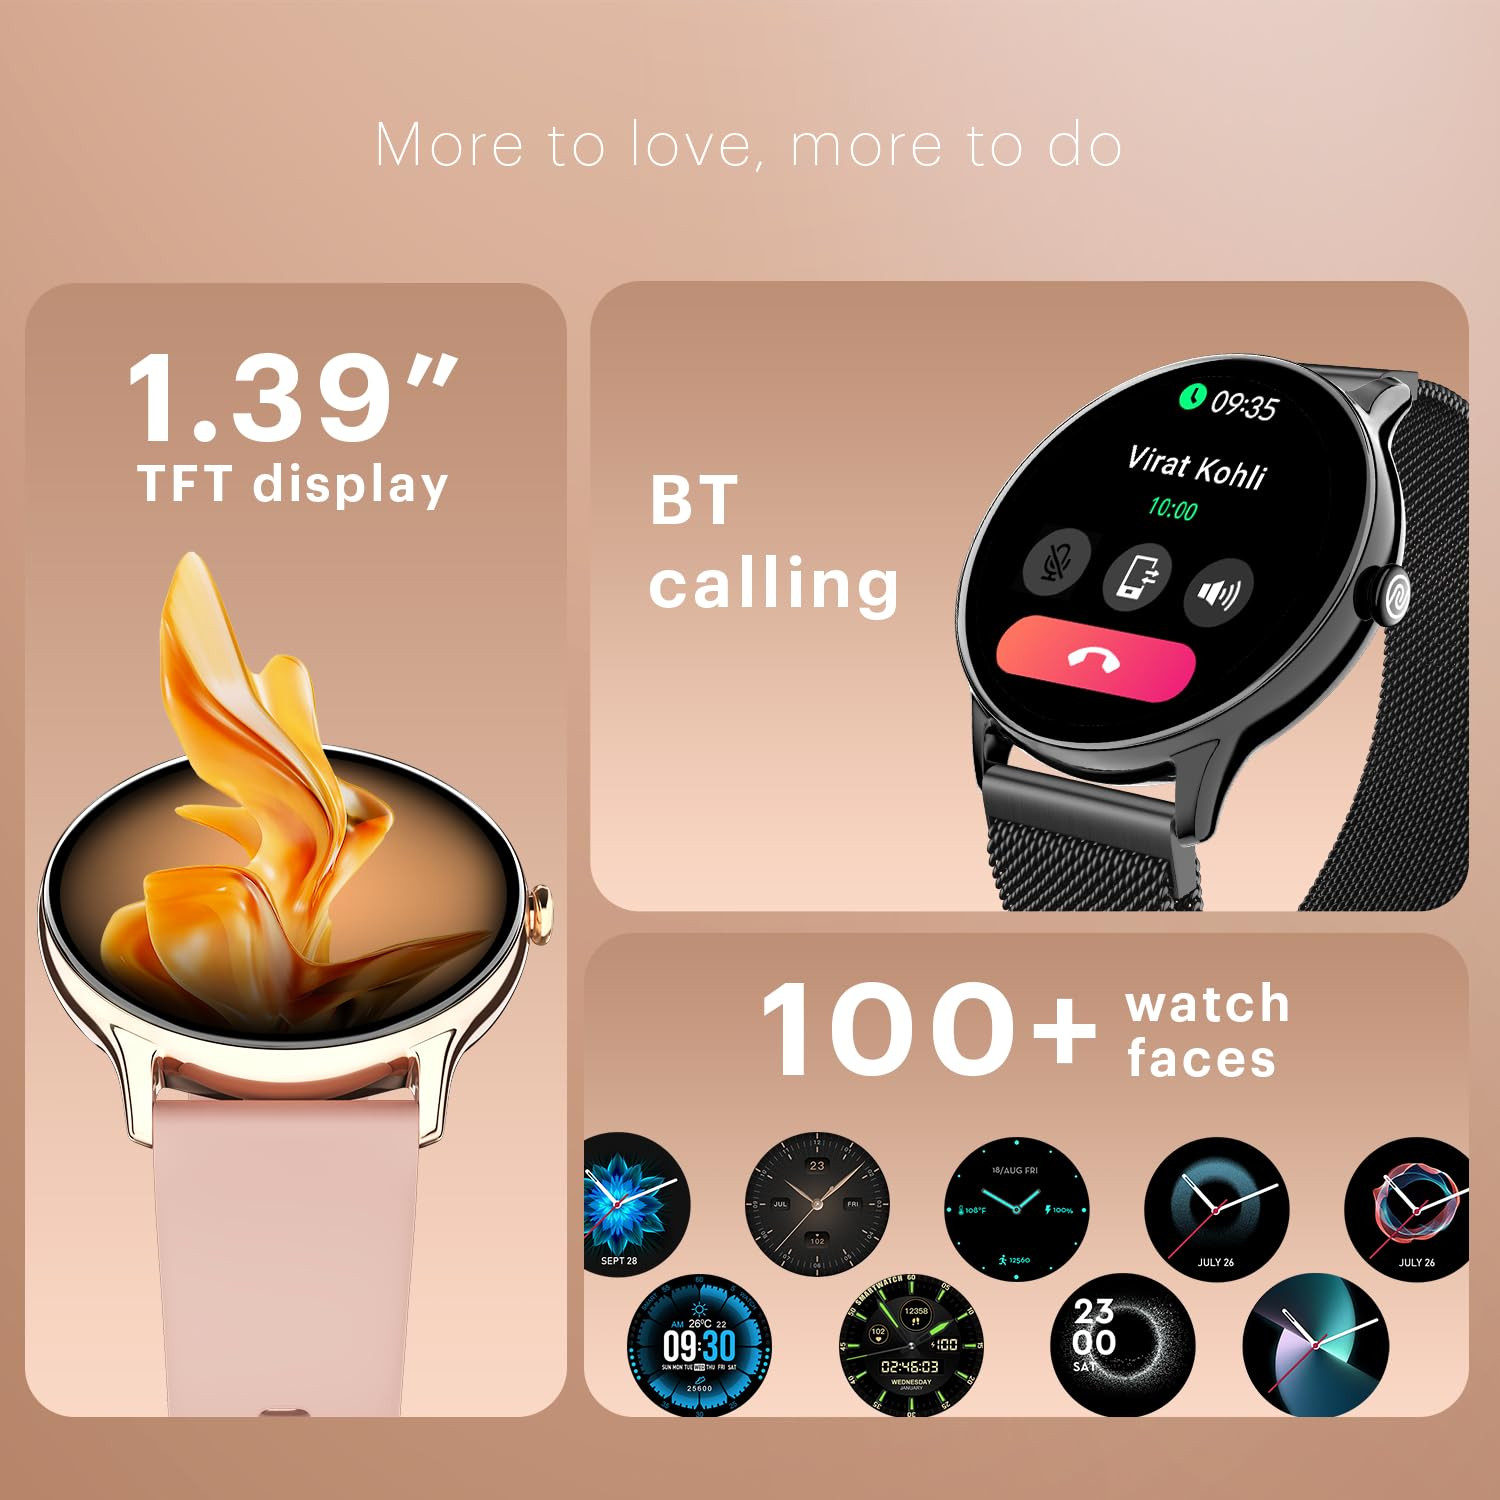 Noise Twist Go Round dial Smartwatch with BT Calling 139 Display Metal Build 100 Watch Faces IP68 Sleep Tracking